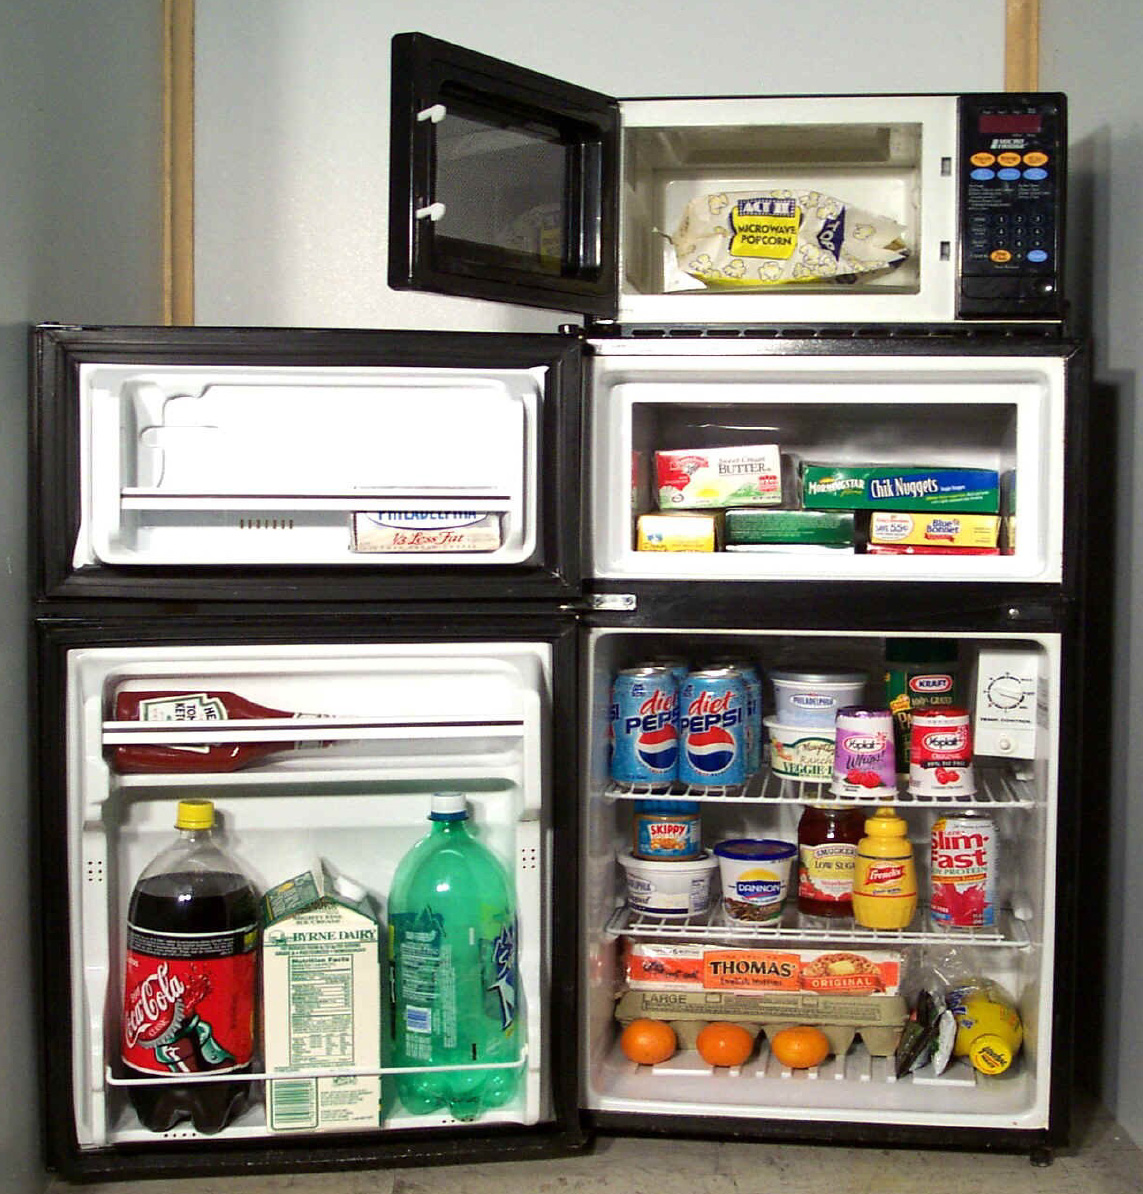 An example of a microfridge with doors open and stocked.